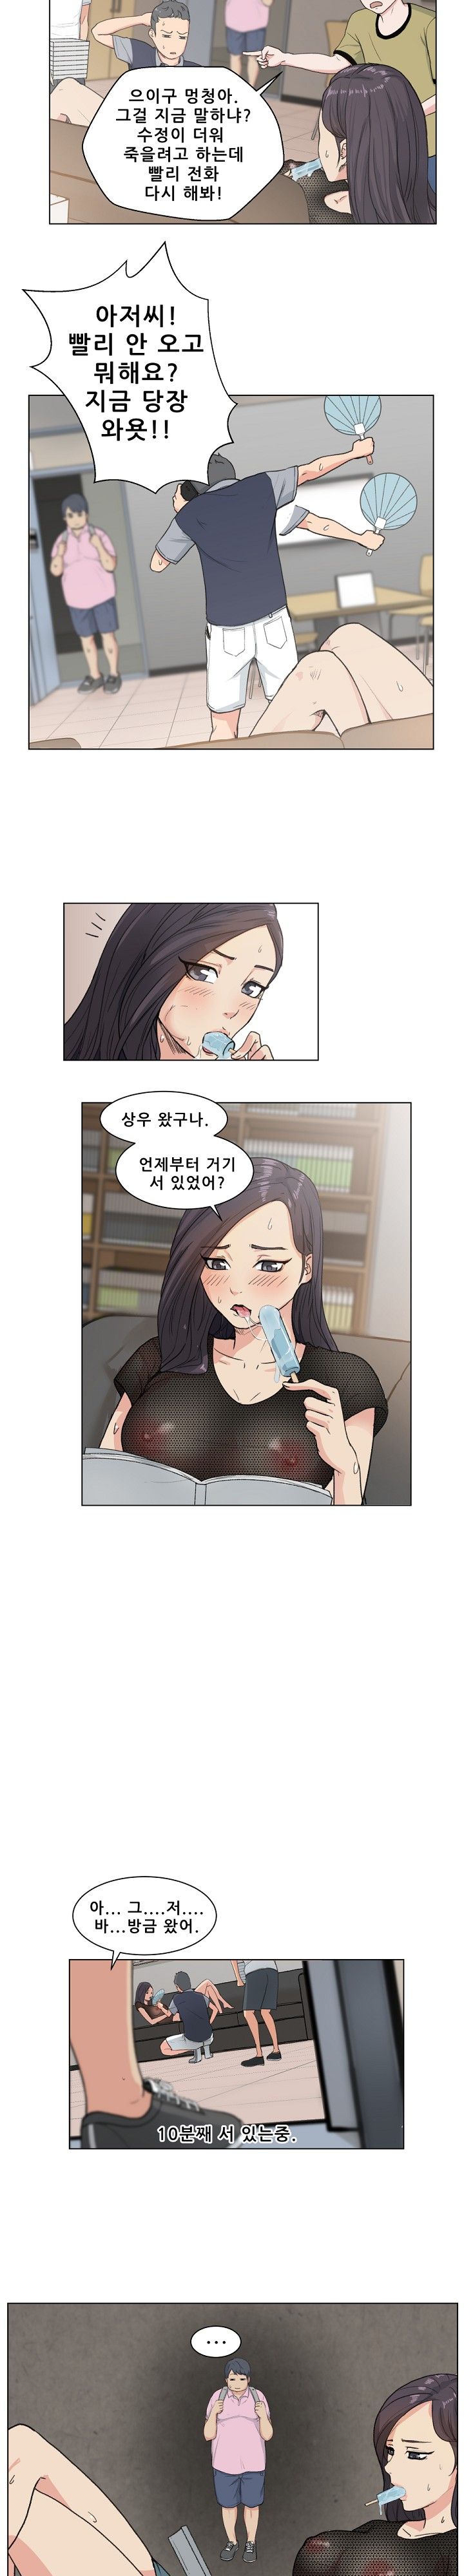 Sooyung Comic Shop Raw - Chapter 1 Page 4